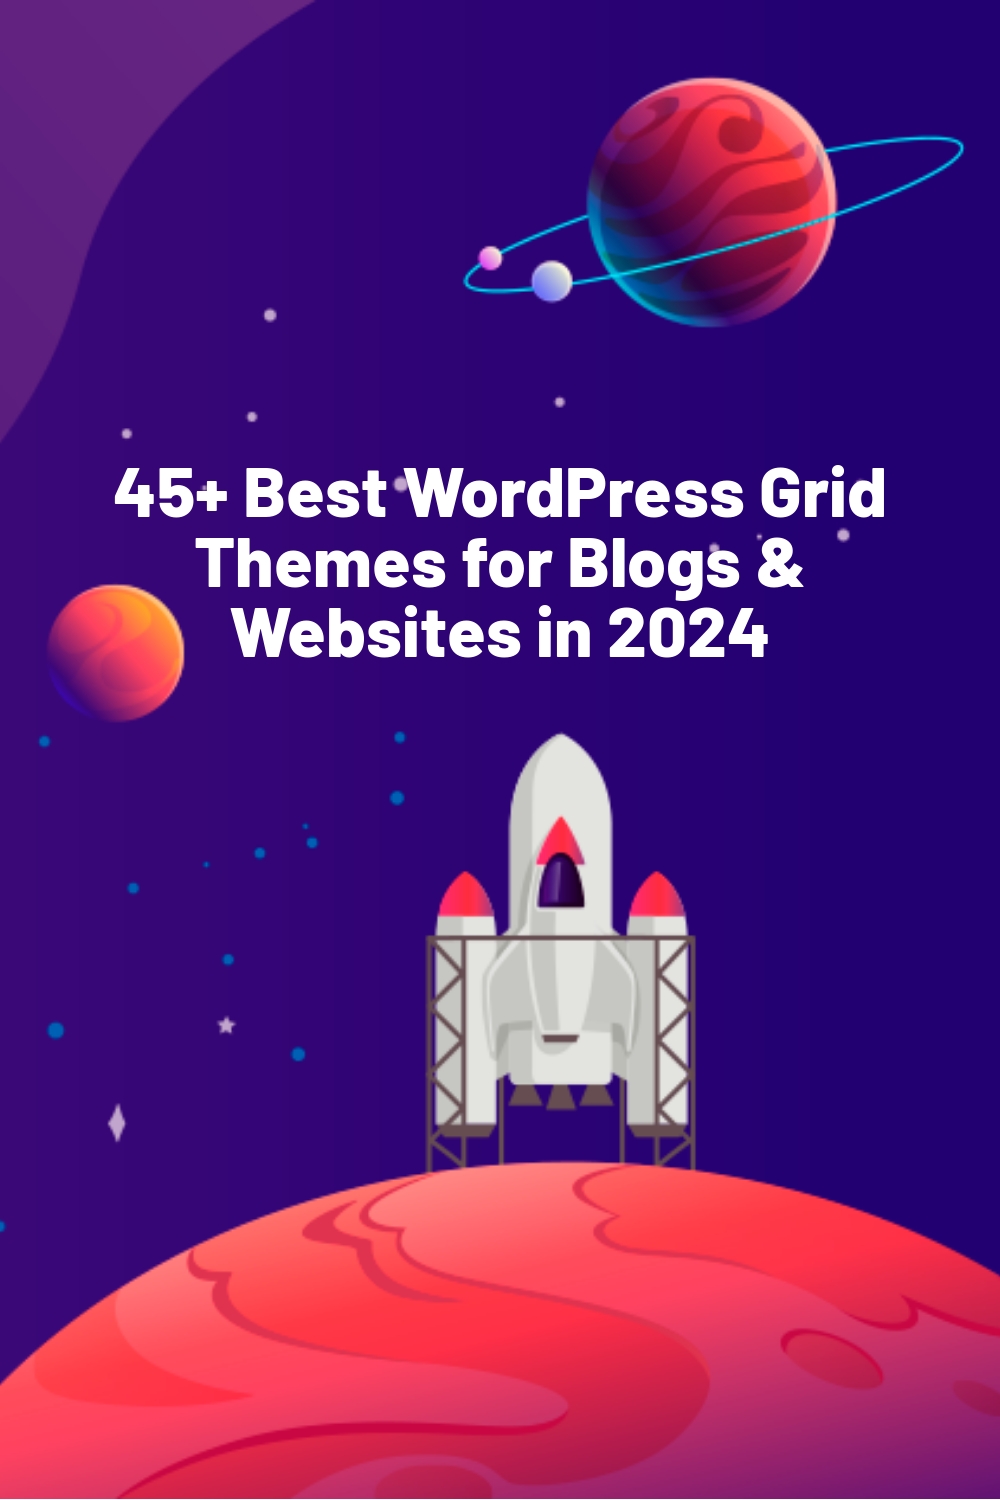 45+ Best WordPress Grid Themes for Blogs & Websites in 2024